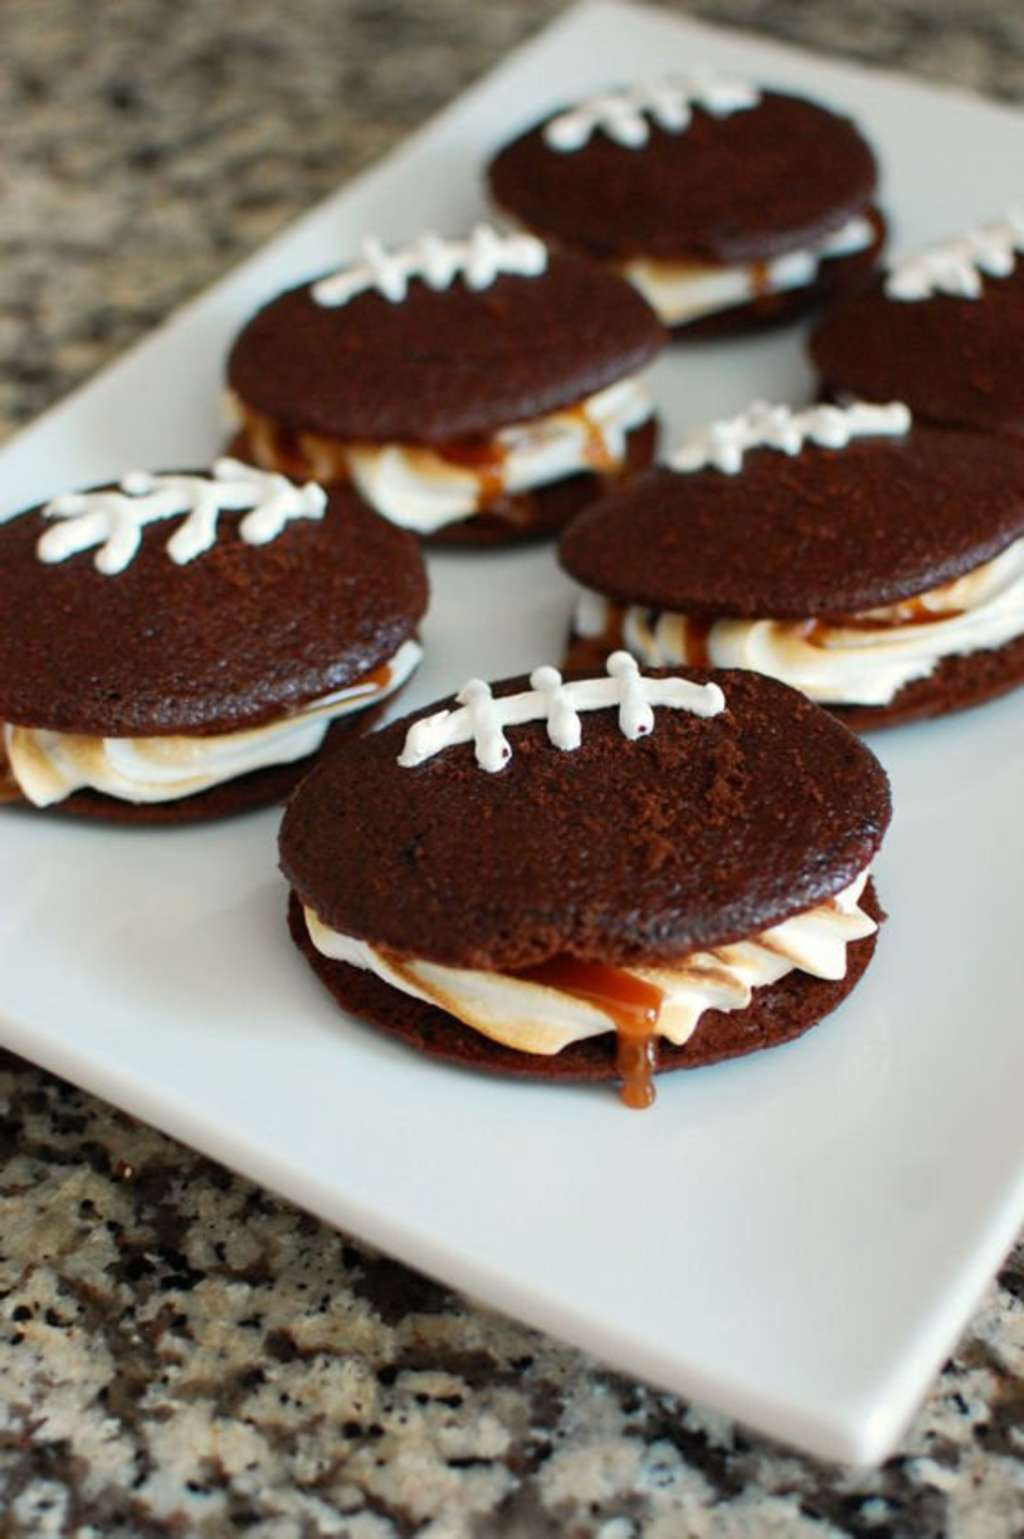 Football Desserts Recipes
 8 Adorable Football Shaped Desserts for Your Super Bowl